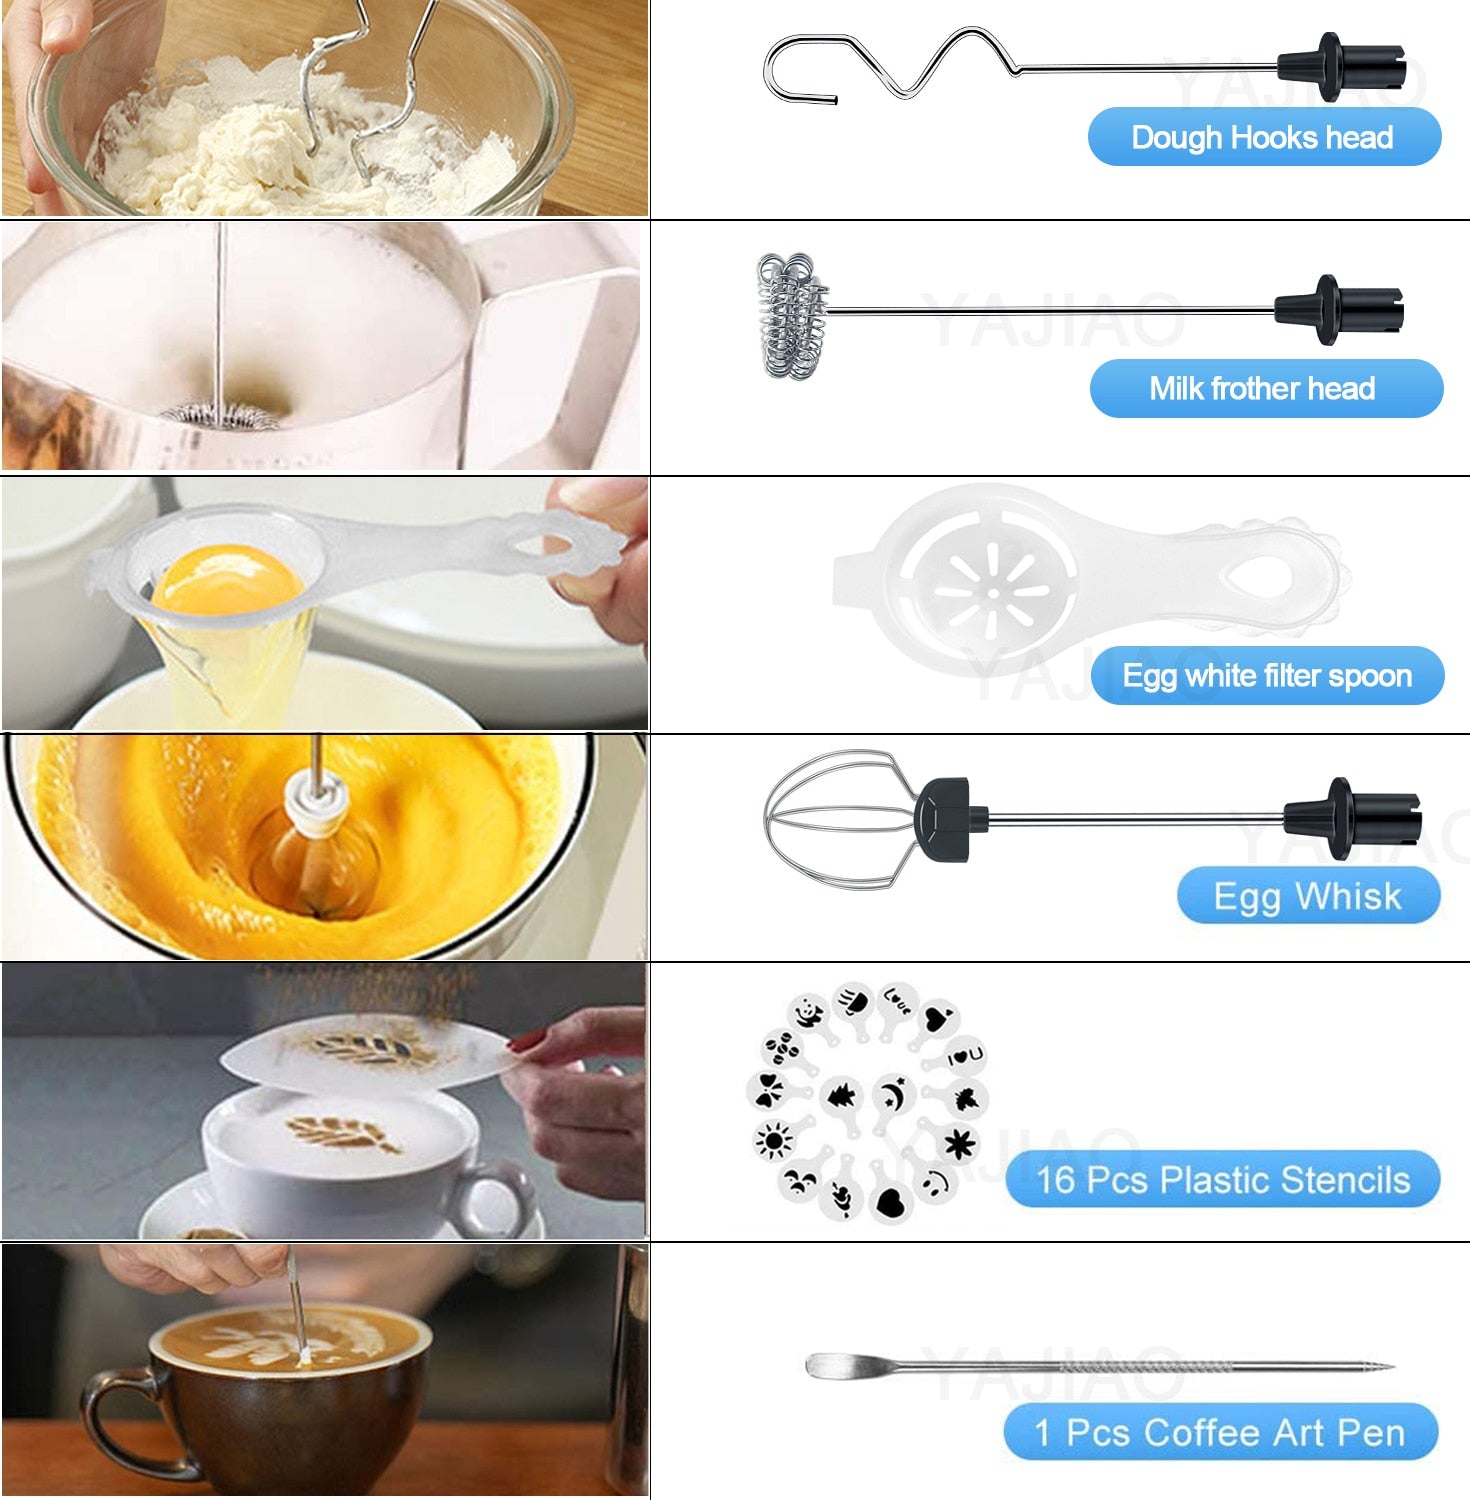 Electric Mixer Blender Milk Frother Handheld With USB Charger Dock and Travel Bag